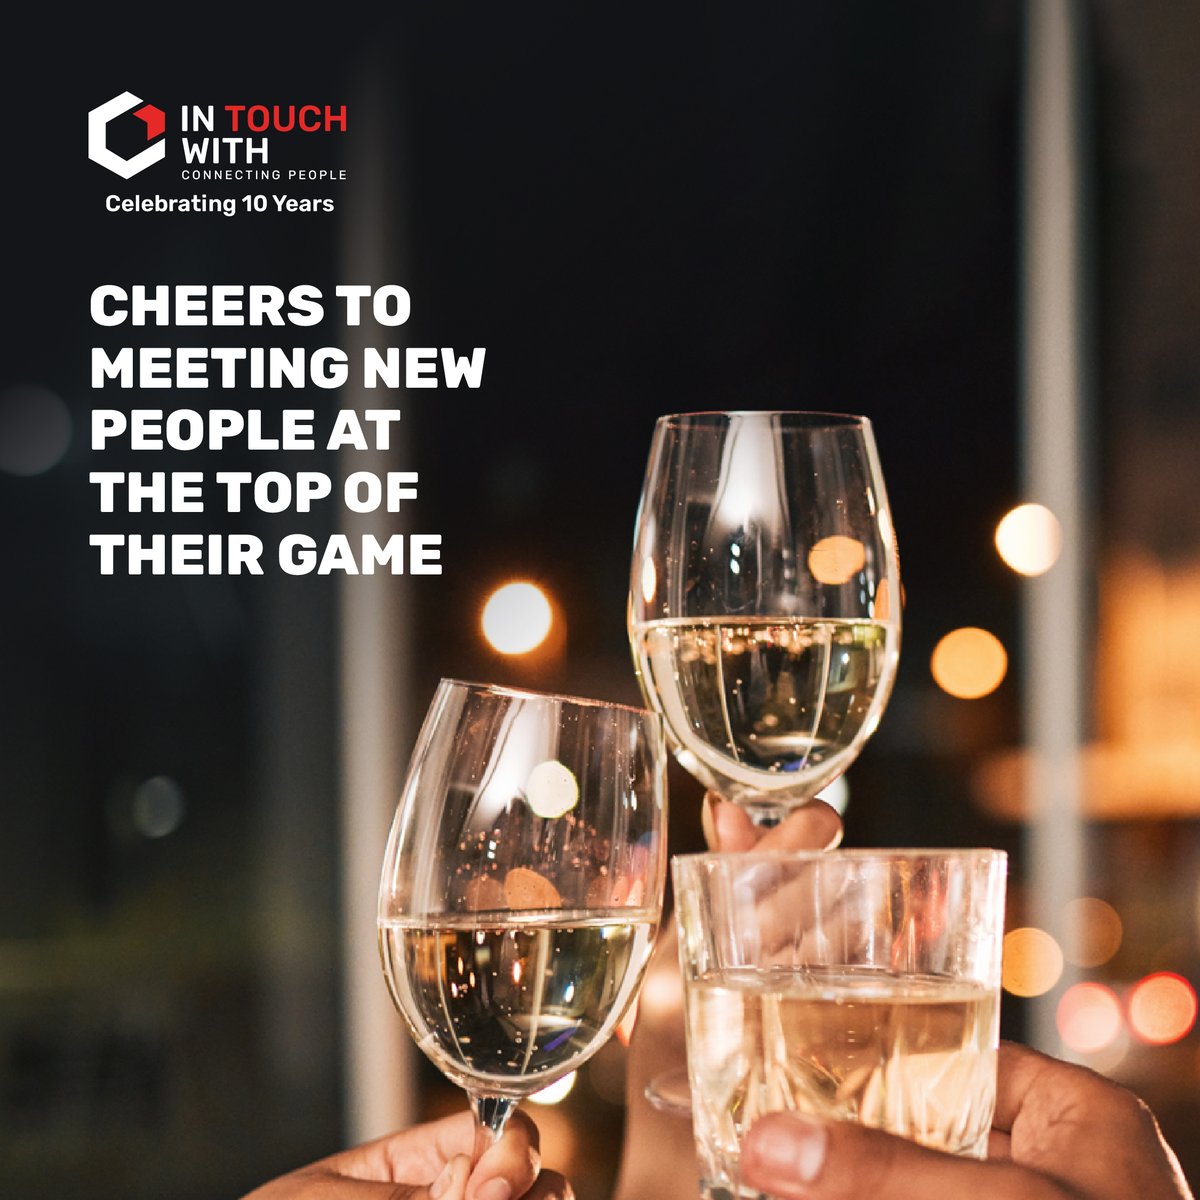 ITW events provide the perfect platform to connect with industry leaders, innovators, and game-changers. Become a member today and unlock a world of opportunities to meet new people at the top of their game! 

#ITW #FODC #FieldofDreamsClub #NetworkingEvolution #Networking